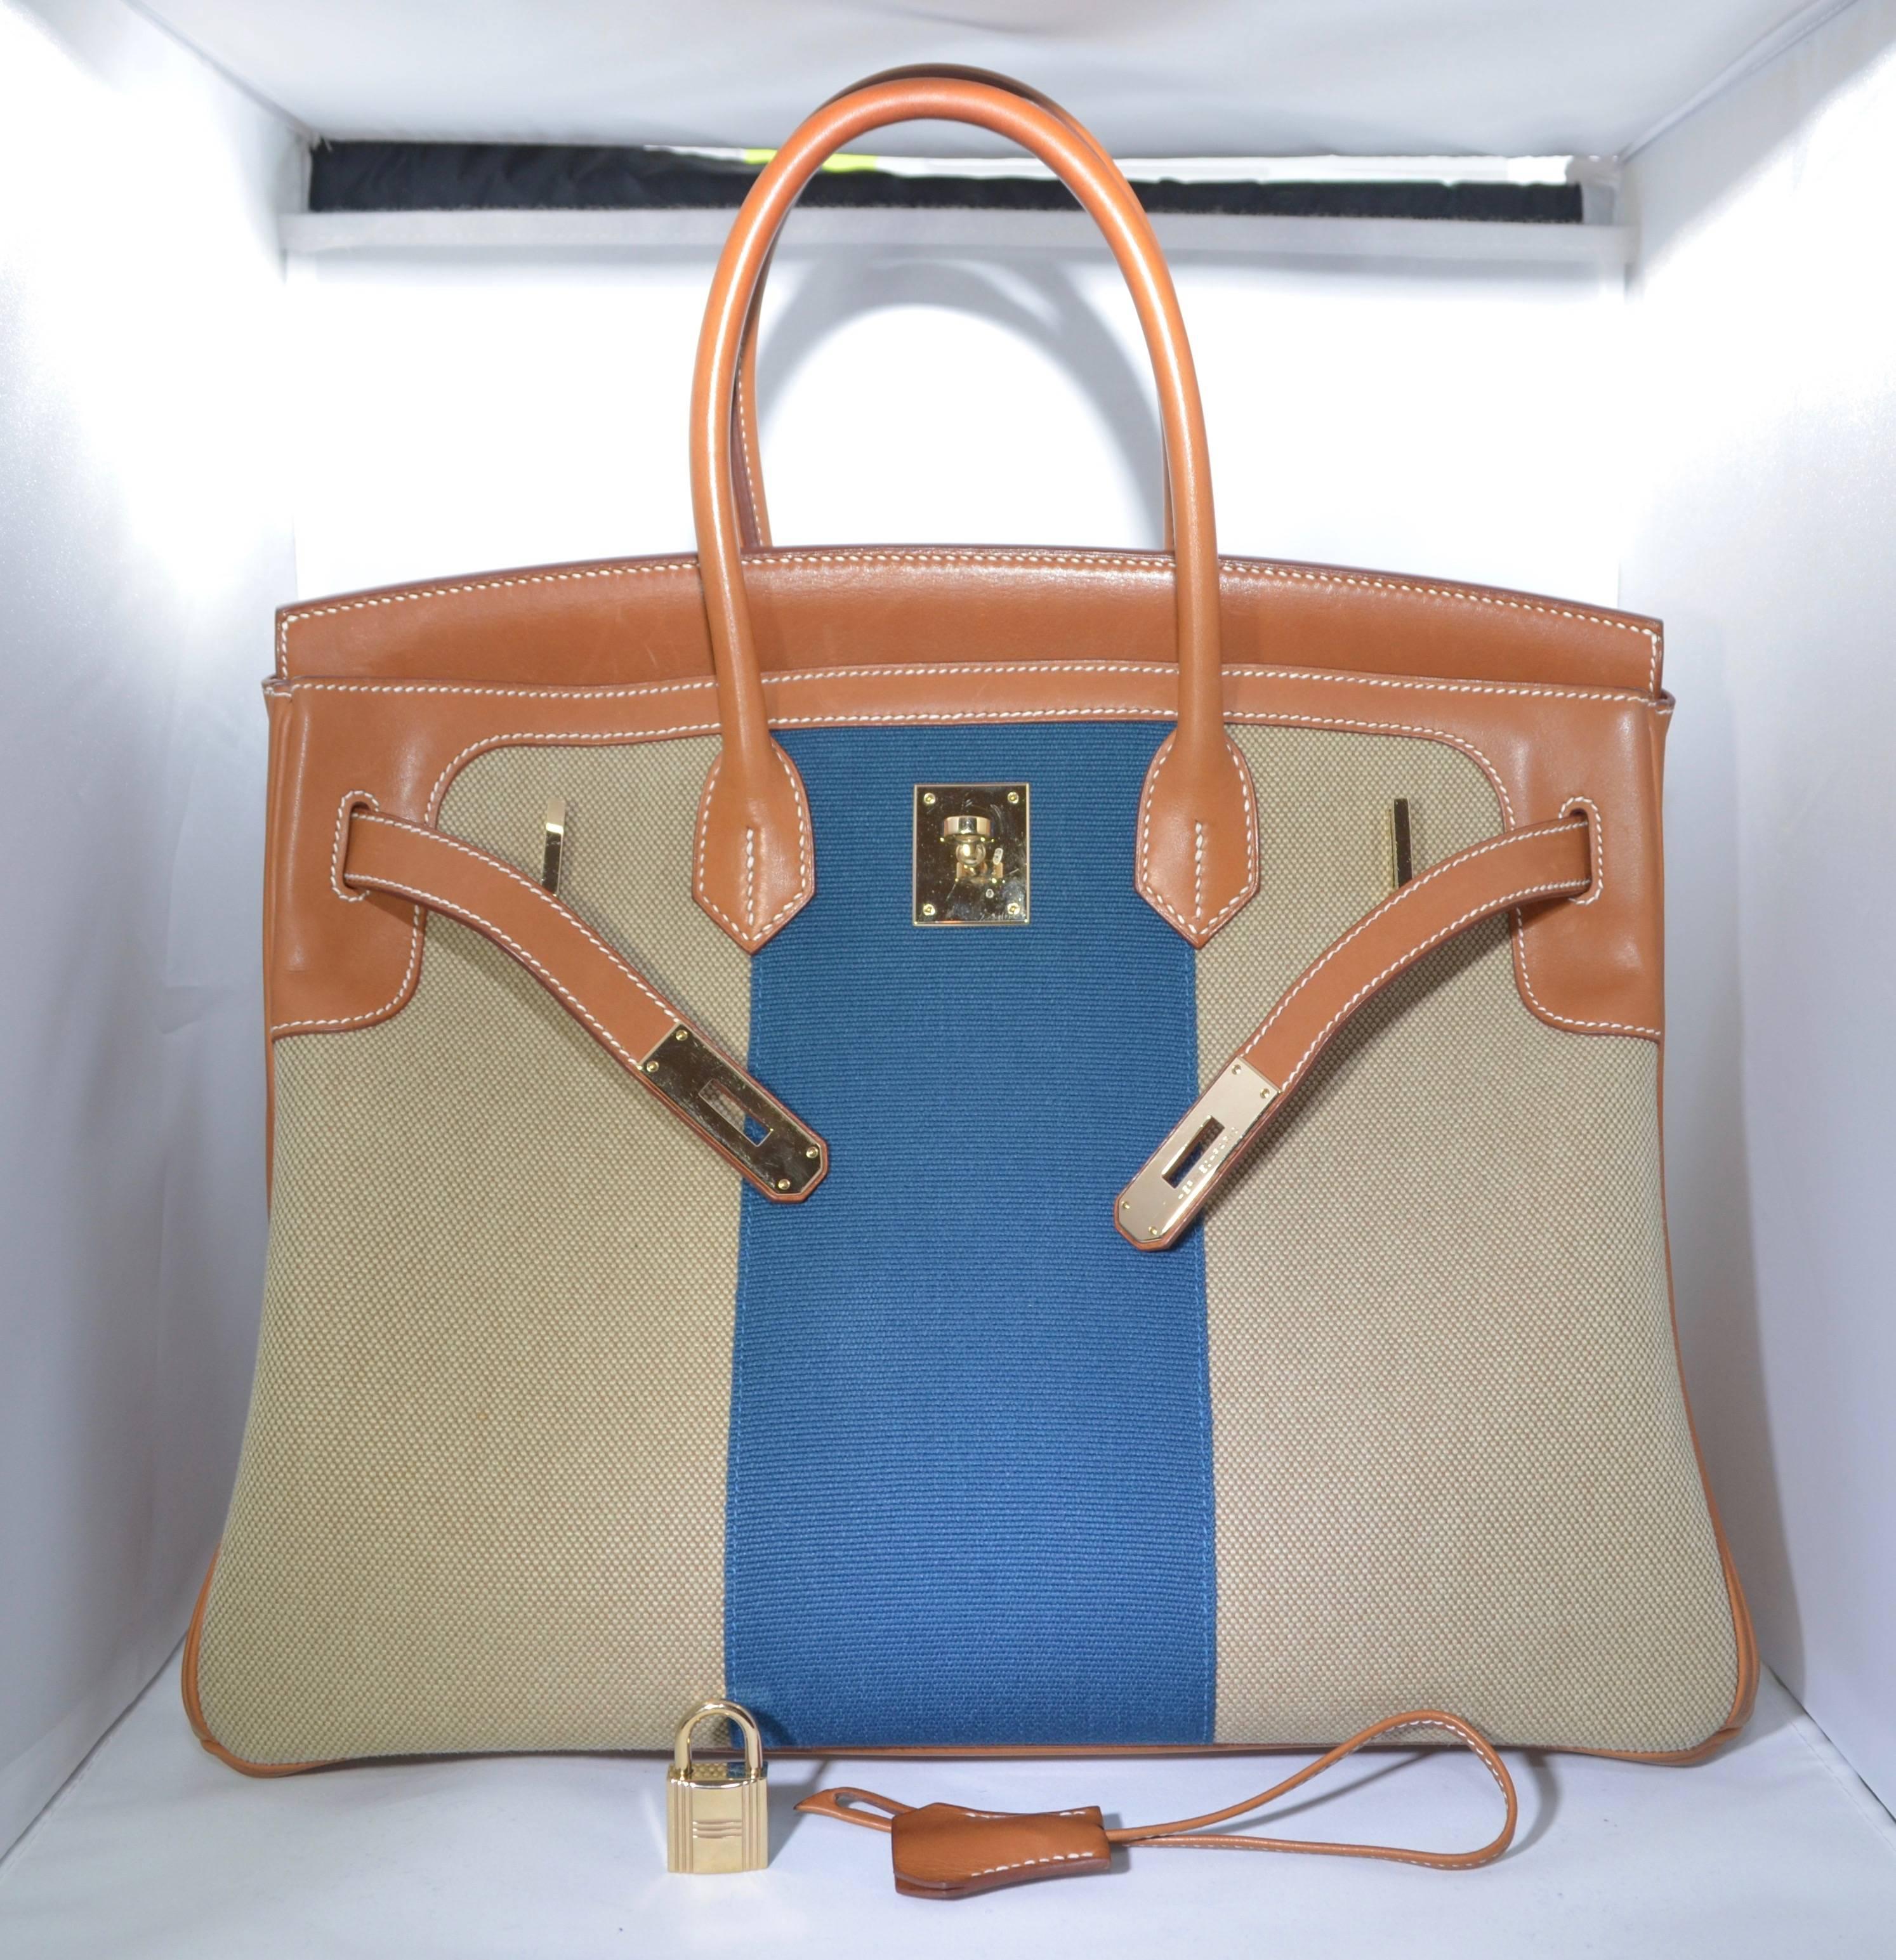 Hermes 2015 Limited Edition 35 cm Flag Birkin, Blue Toile Stripe, Barenia Leather Trimmings, Permabrass Hardware. 

Gently used condition. The Barenia leather is gorgeous yet it marks easily. The bag has a couple of spots on the bottom and some